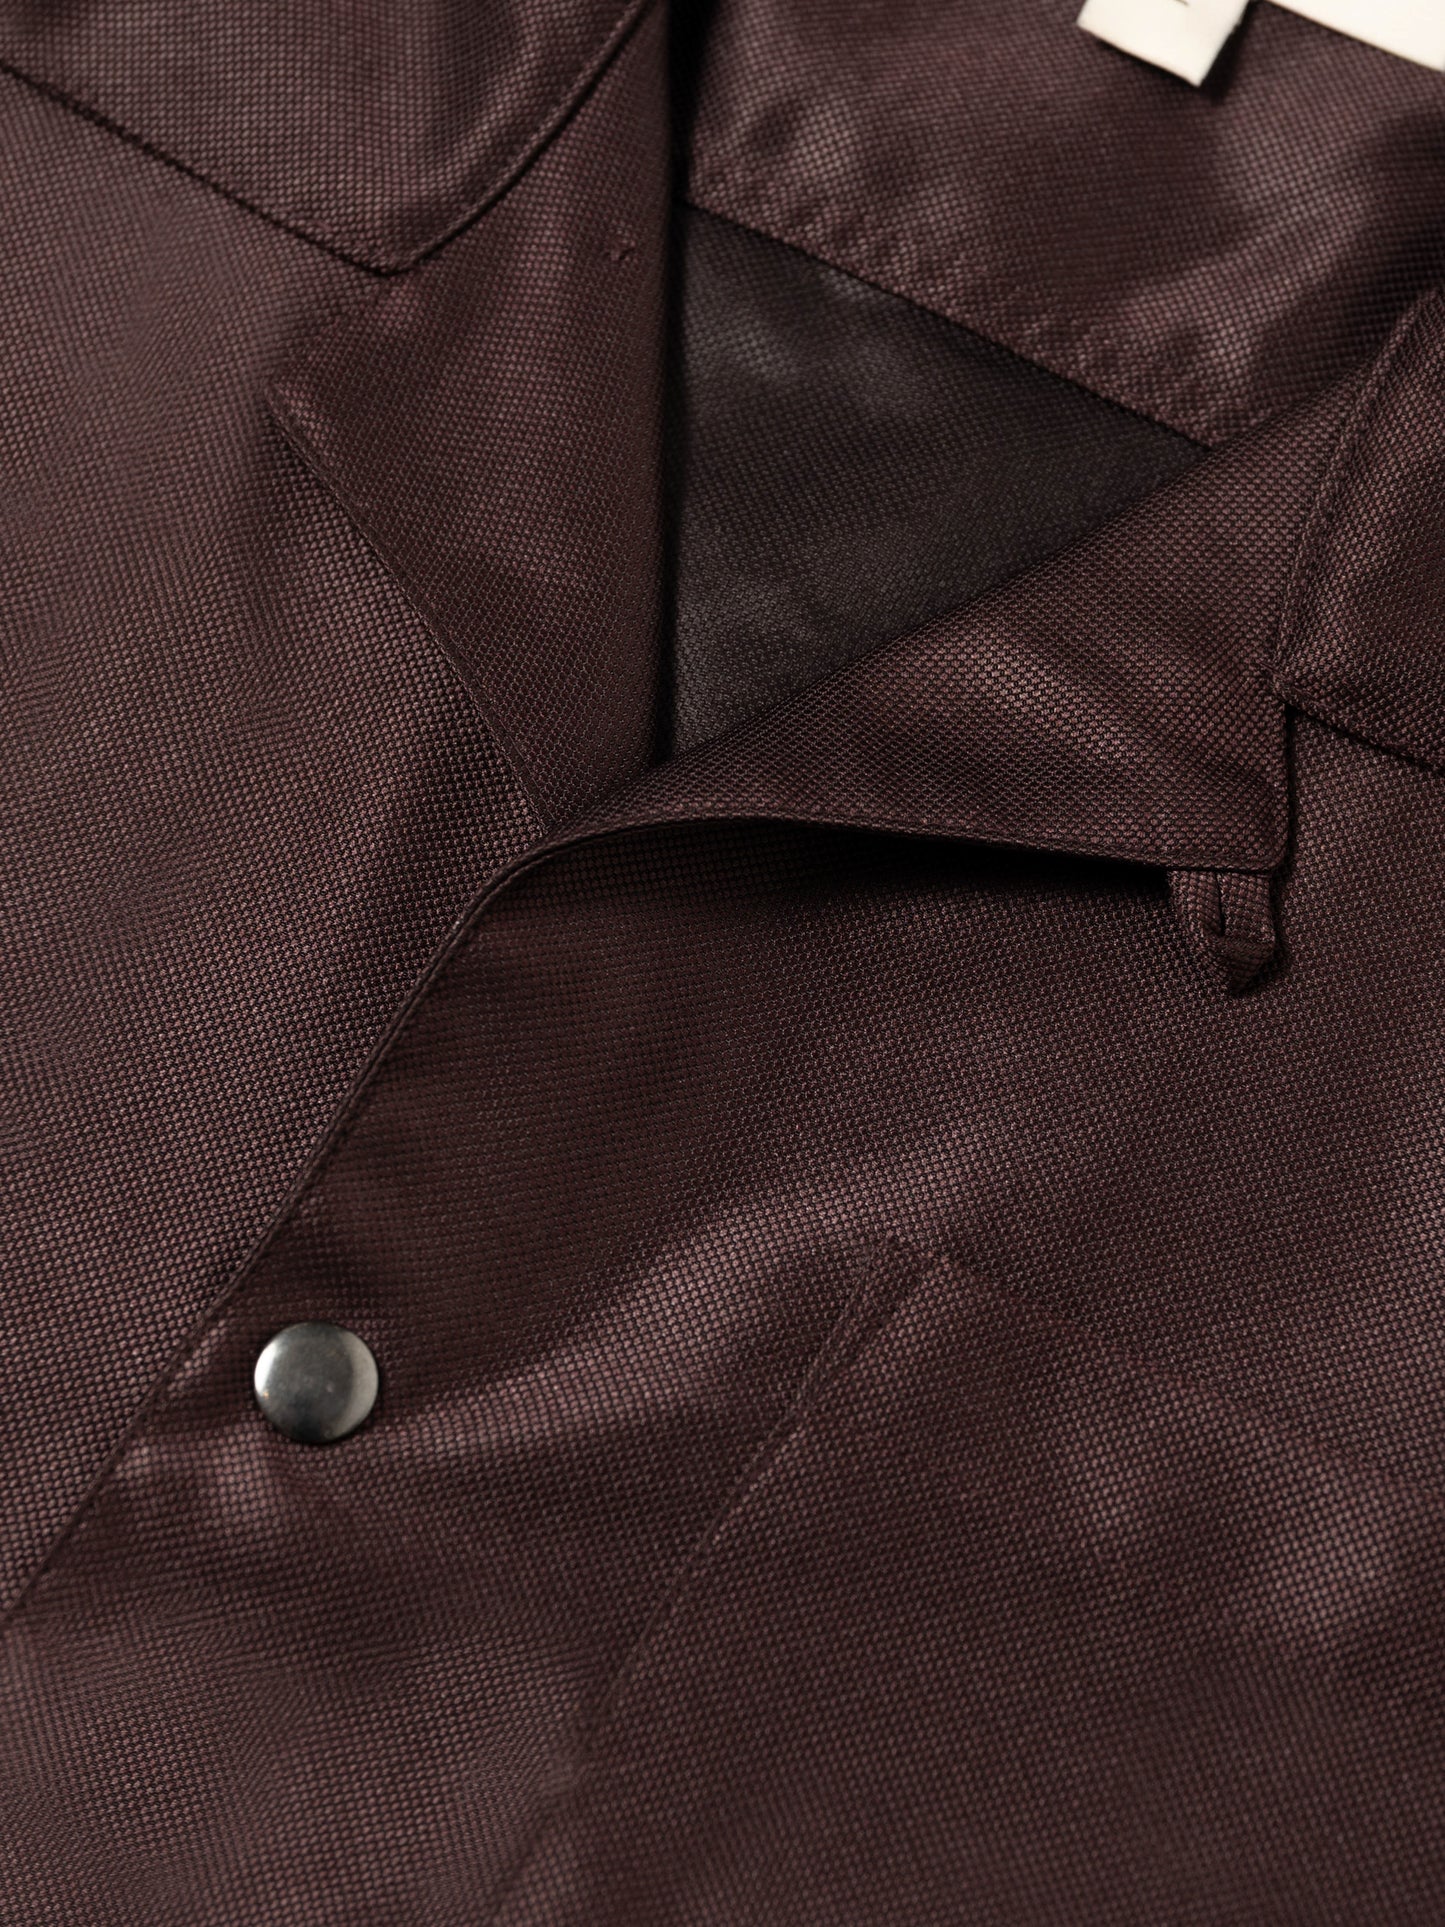 Pyro Shirt in CocaCola Brown